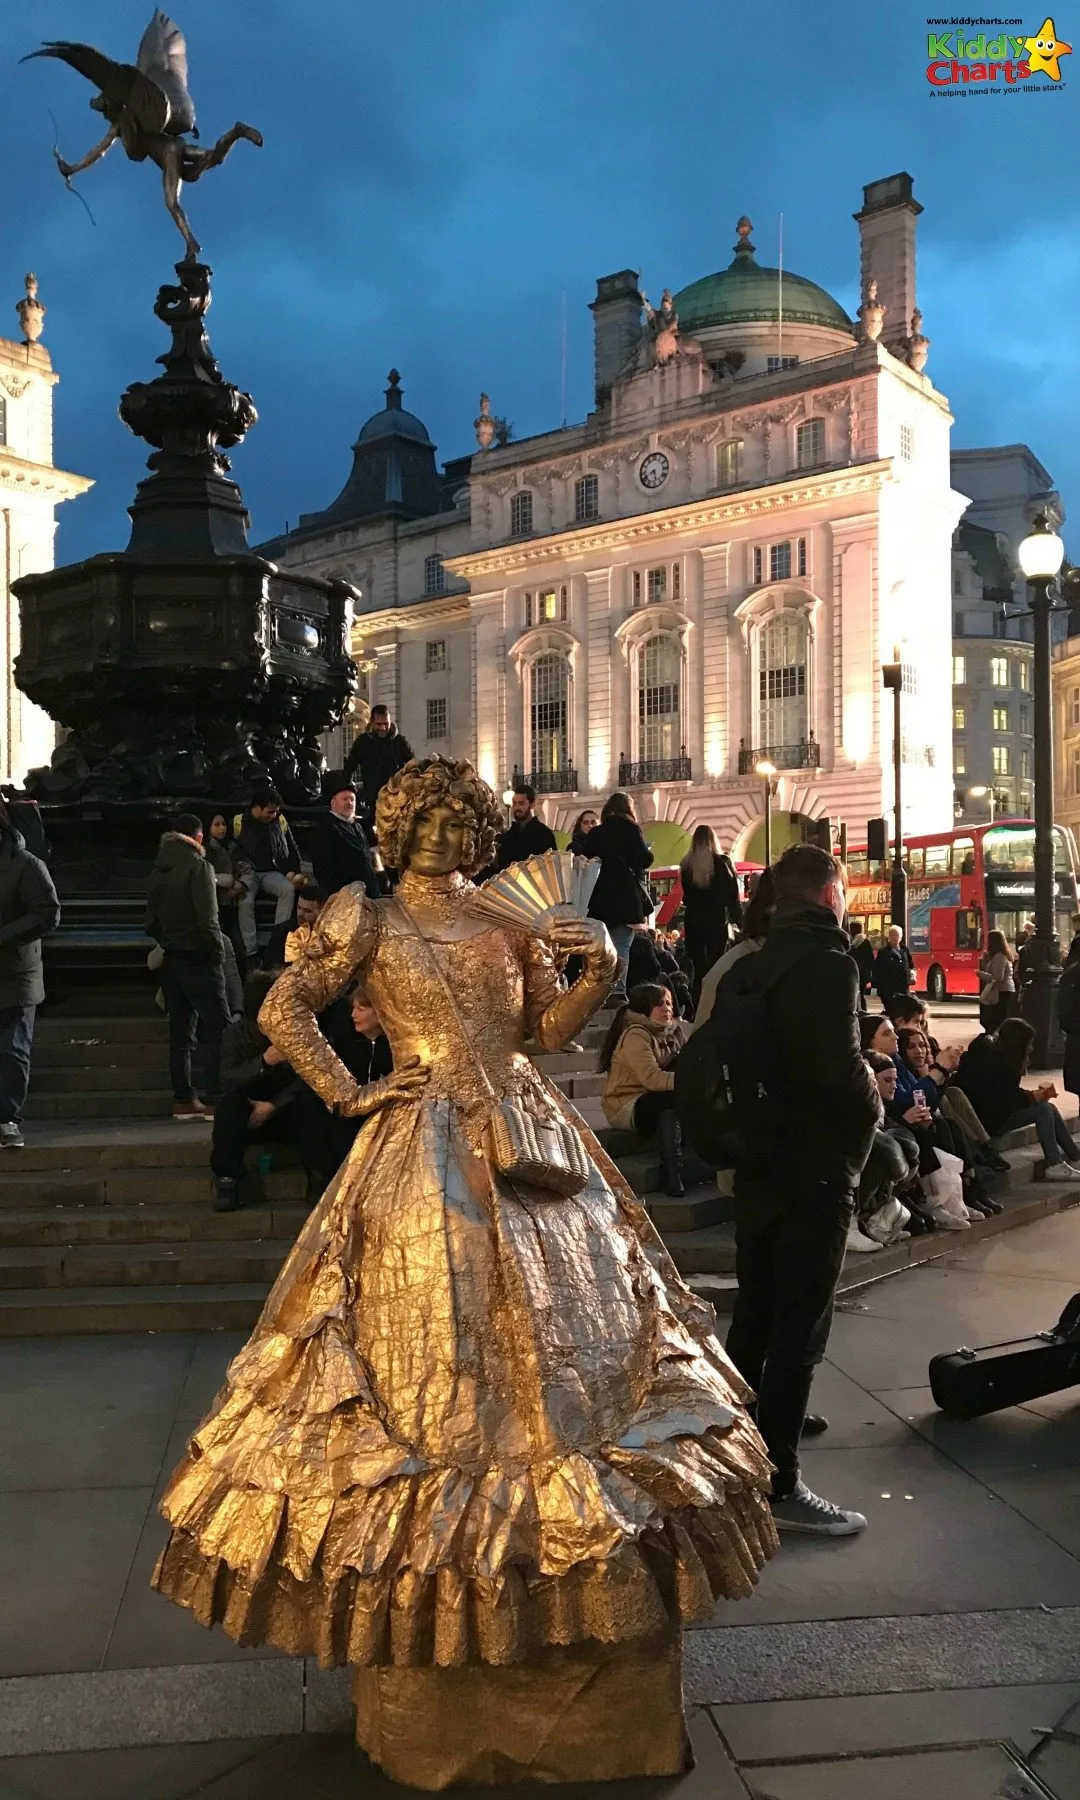 The things to do in London with kids include watching some of the street entertainers need the theatre district in London - a bonus after booking with TripAdvisor.